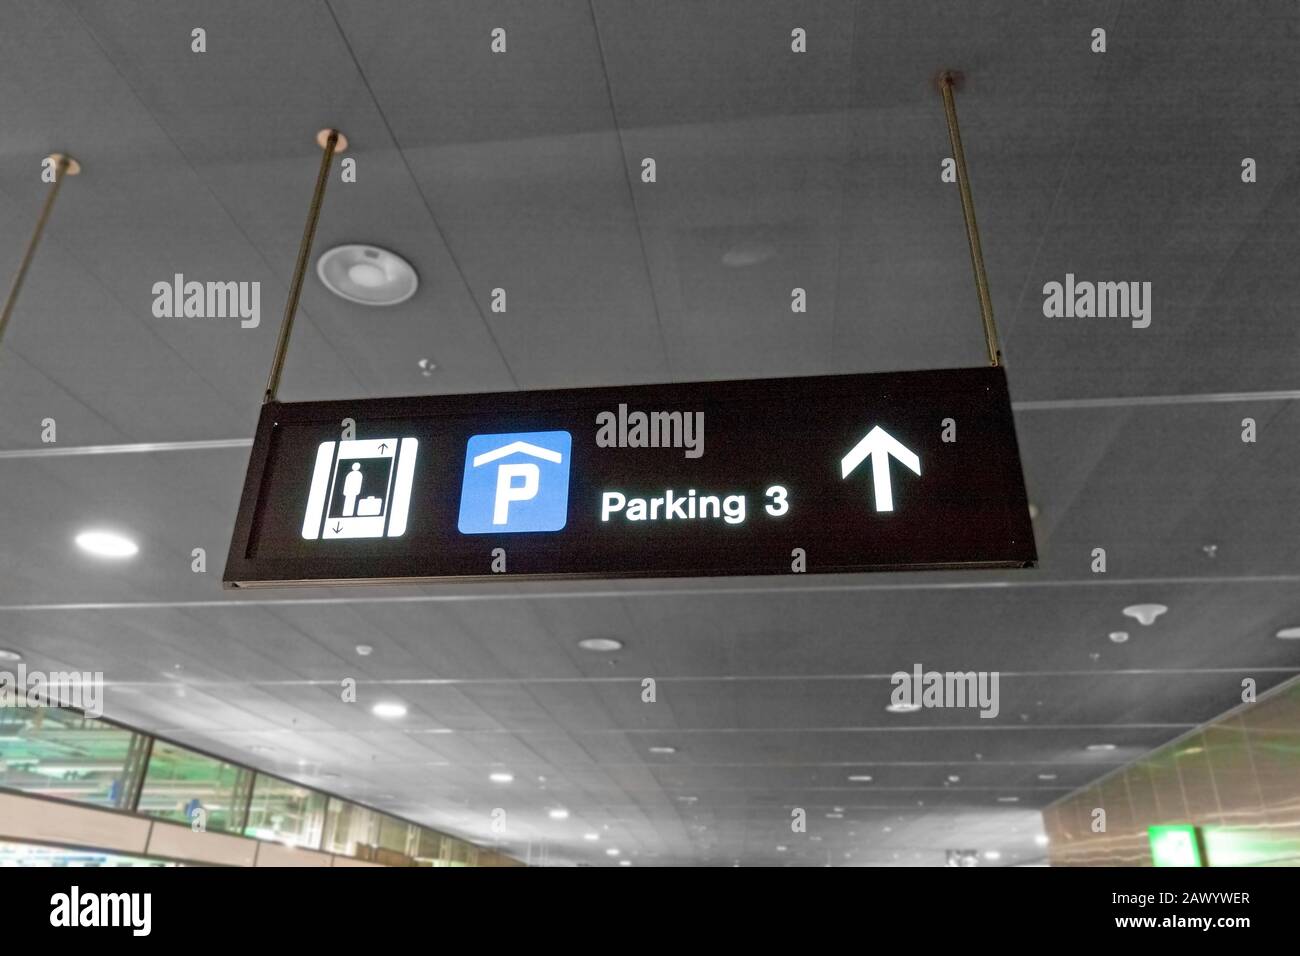 Parking level sign with blue P sign and baggage label at airport Stock Photo